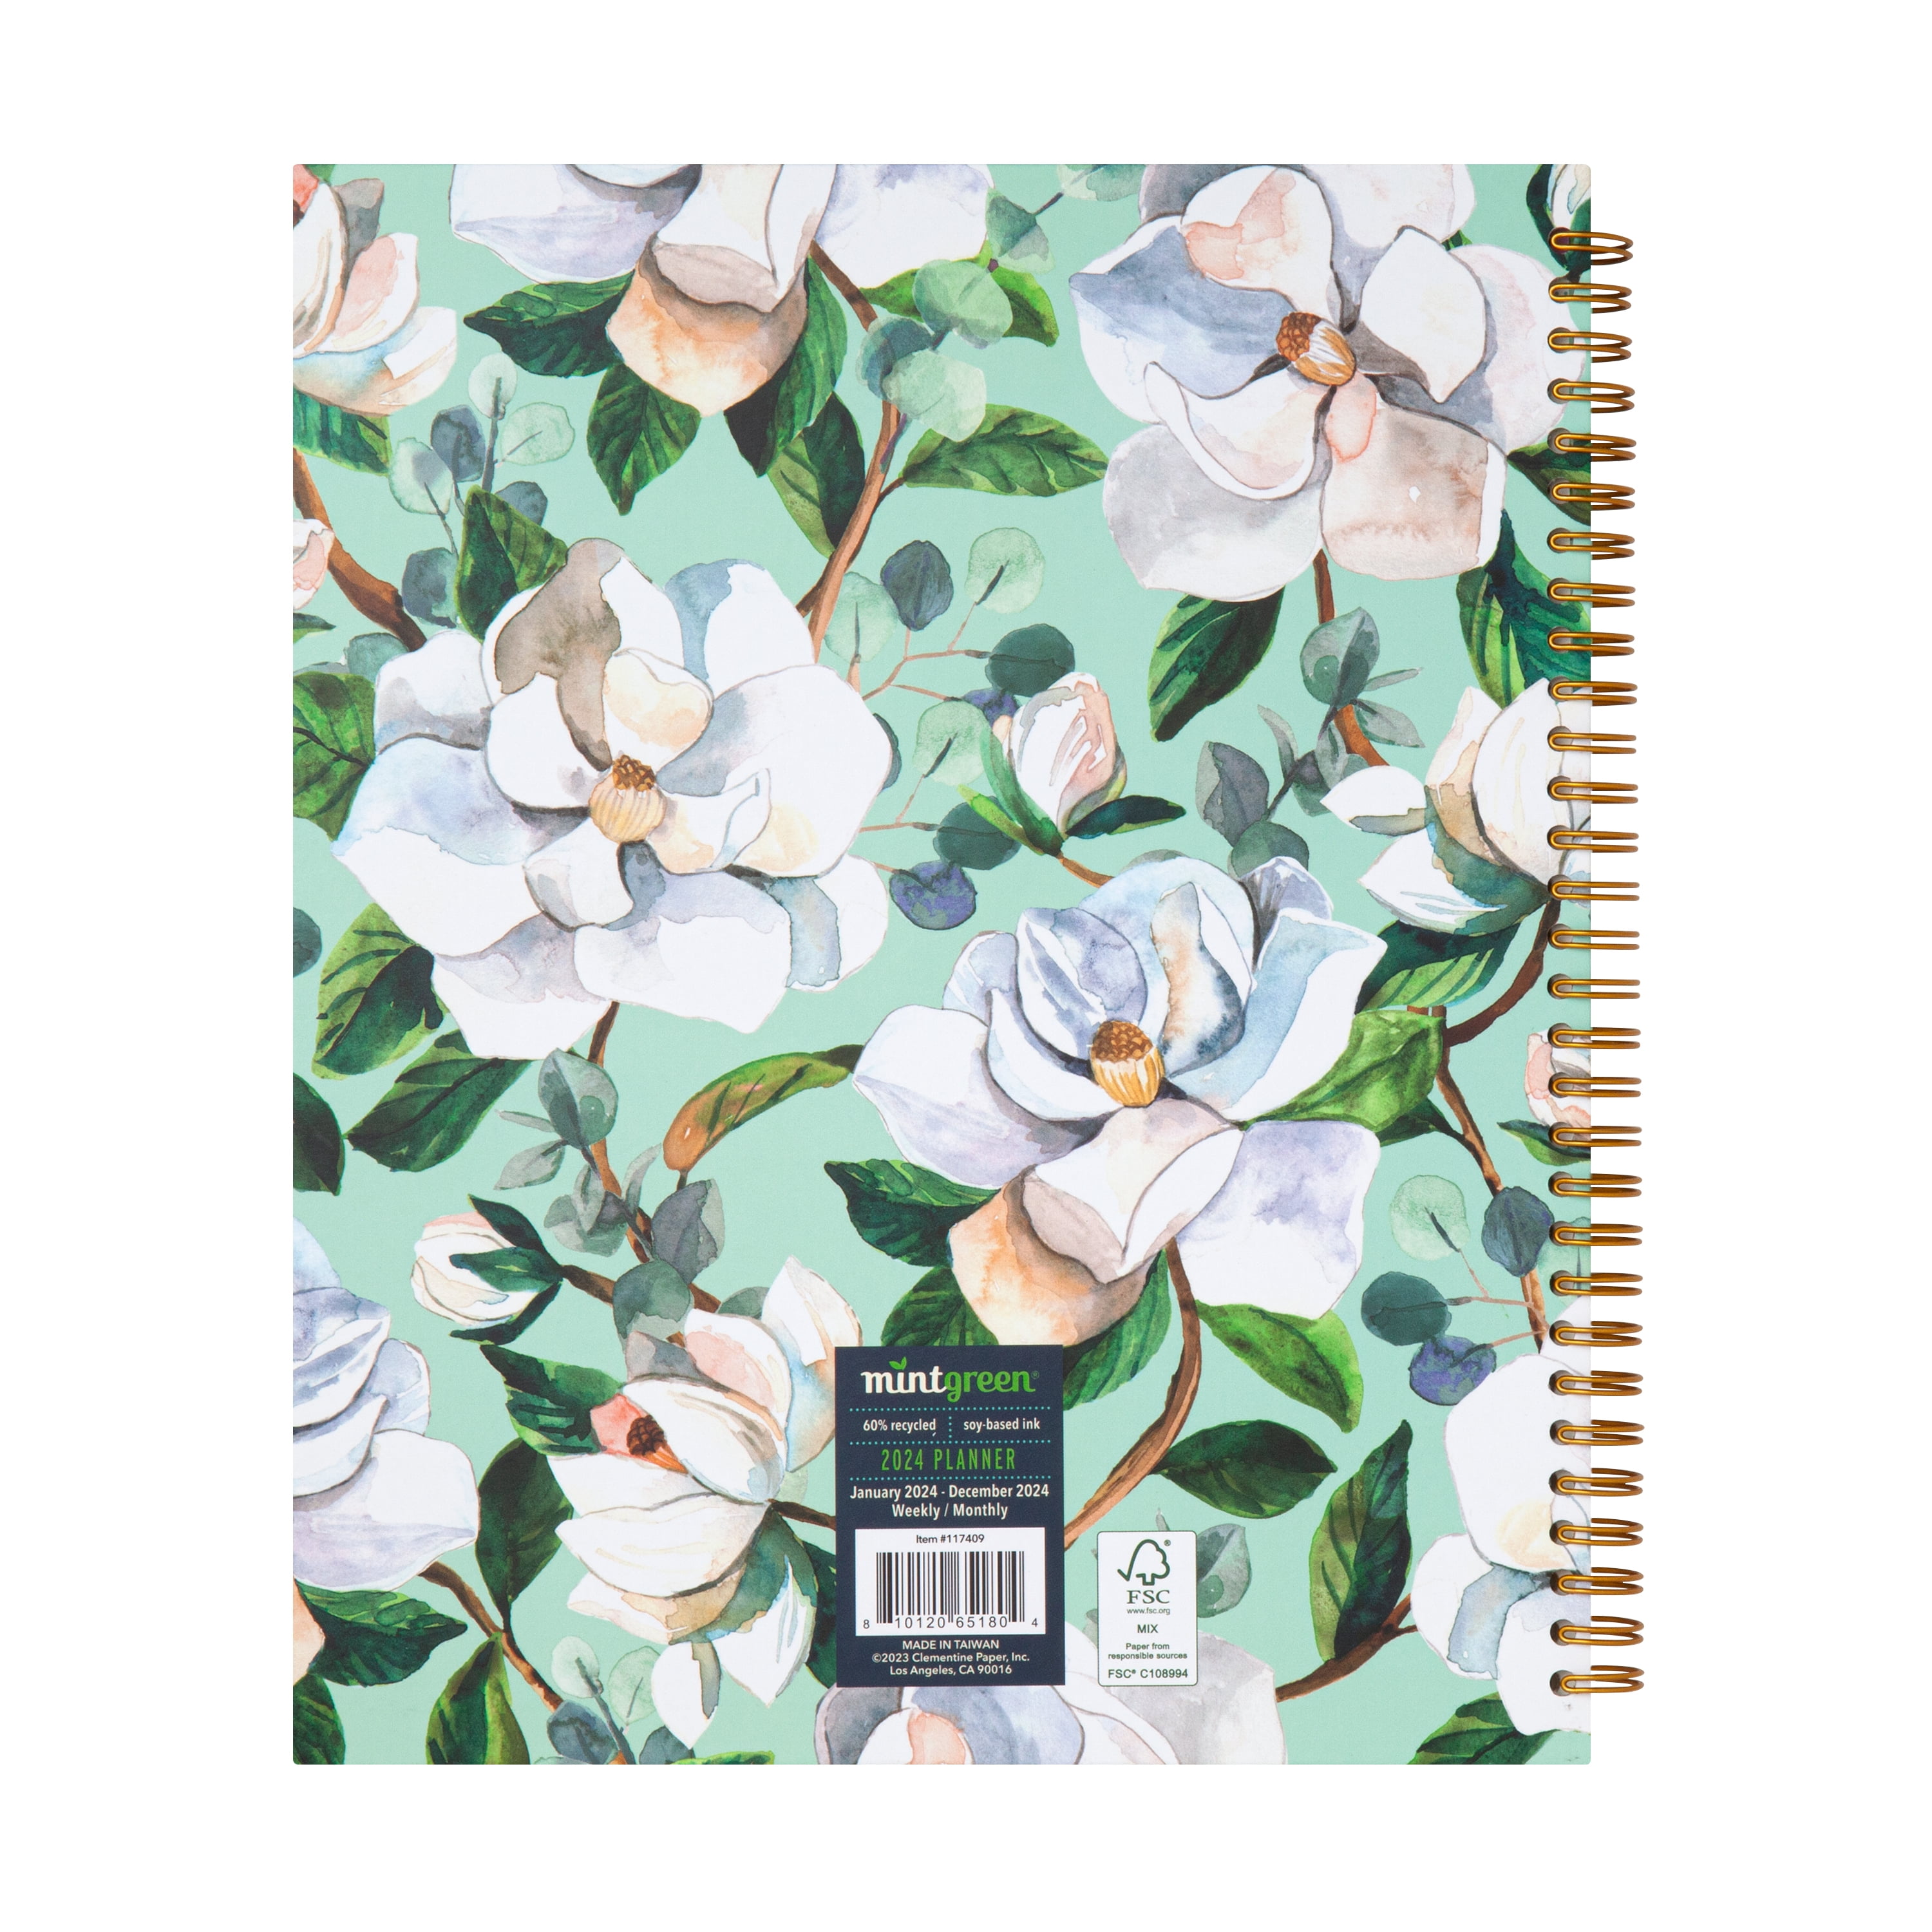 Curation 2024 Planner Forest Green